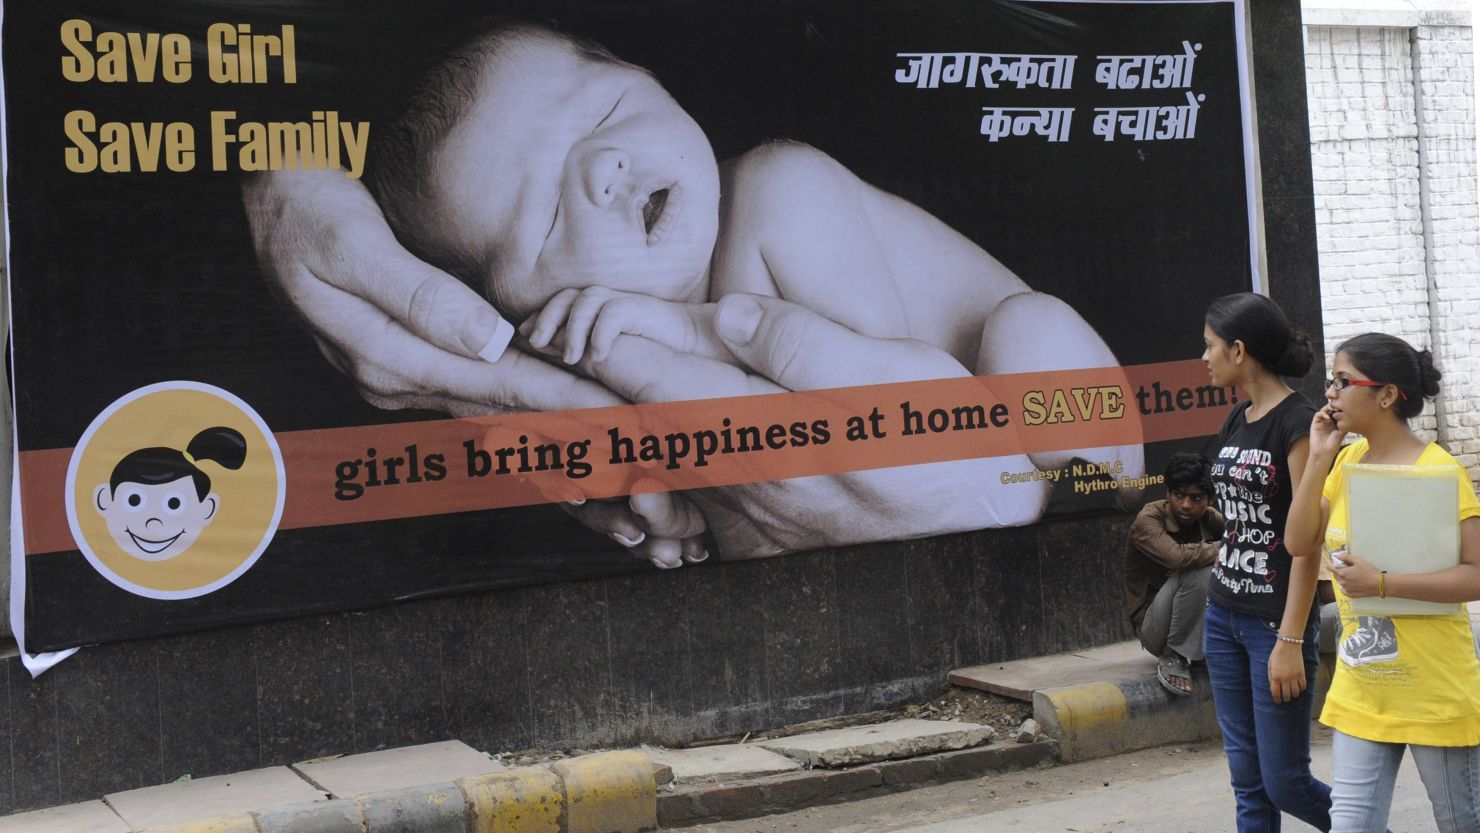 Women walk past a billboard in New Delhi in 2010. India has long struggled with sex-selective abortions, leading to a growing gender gap.